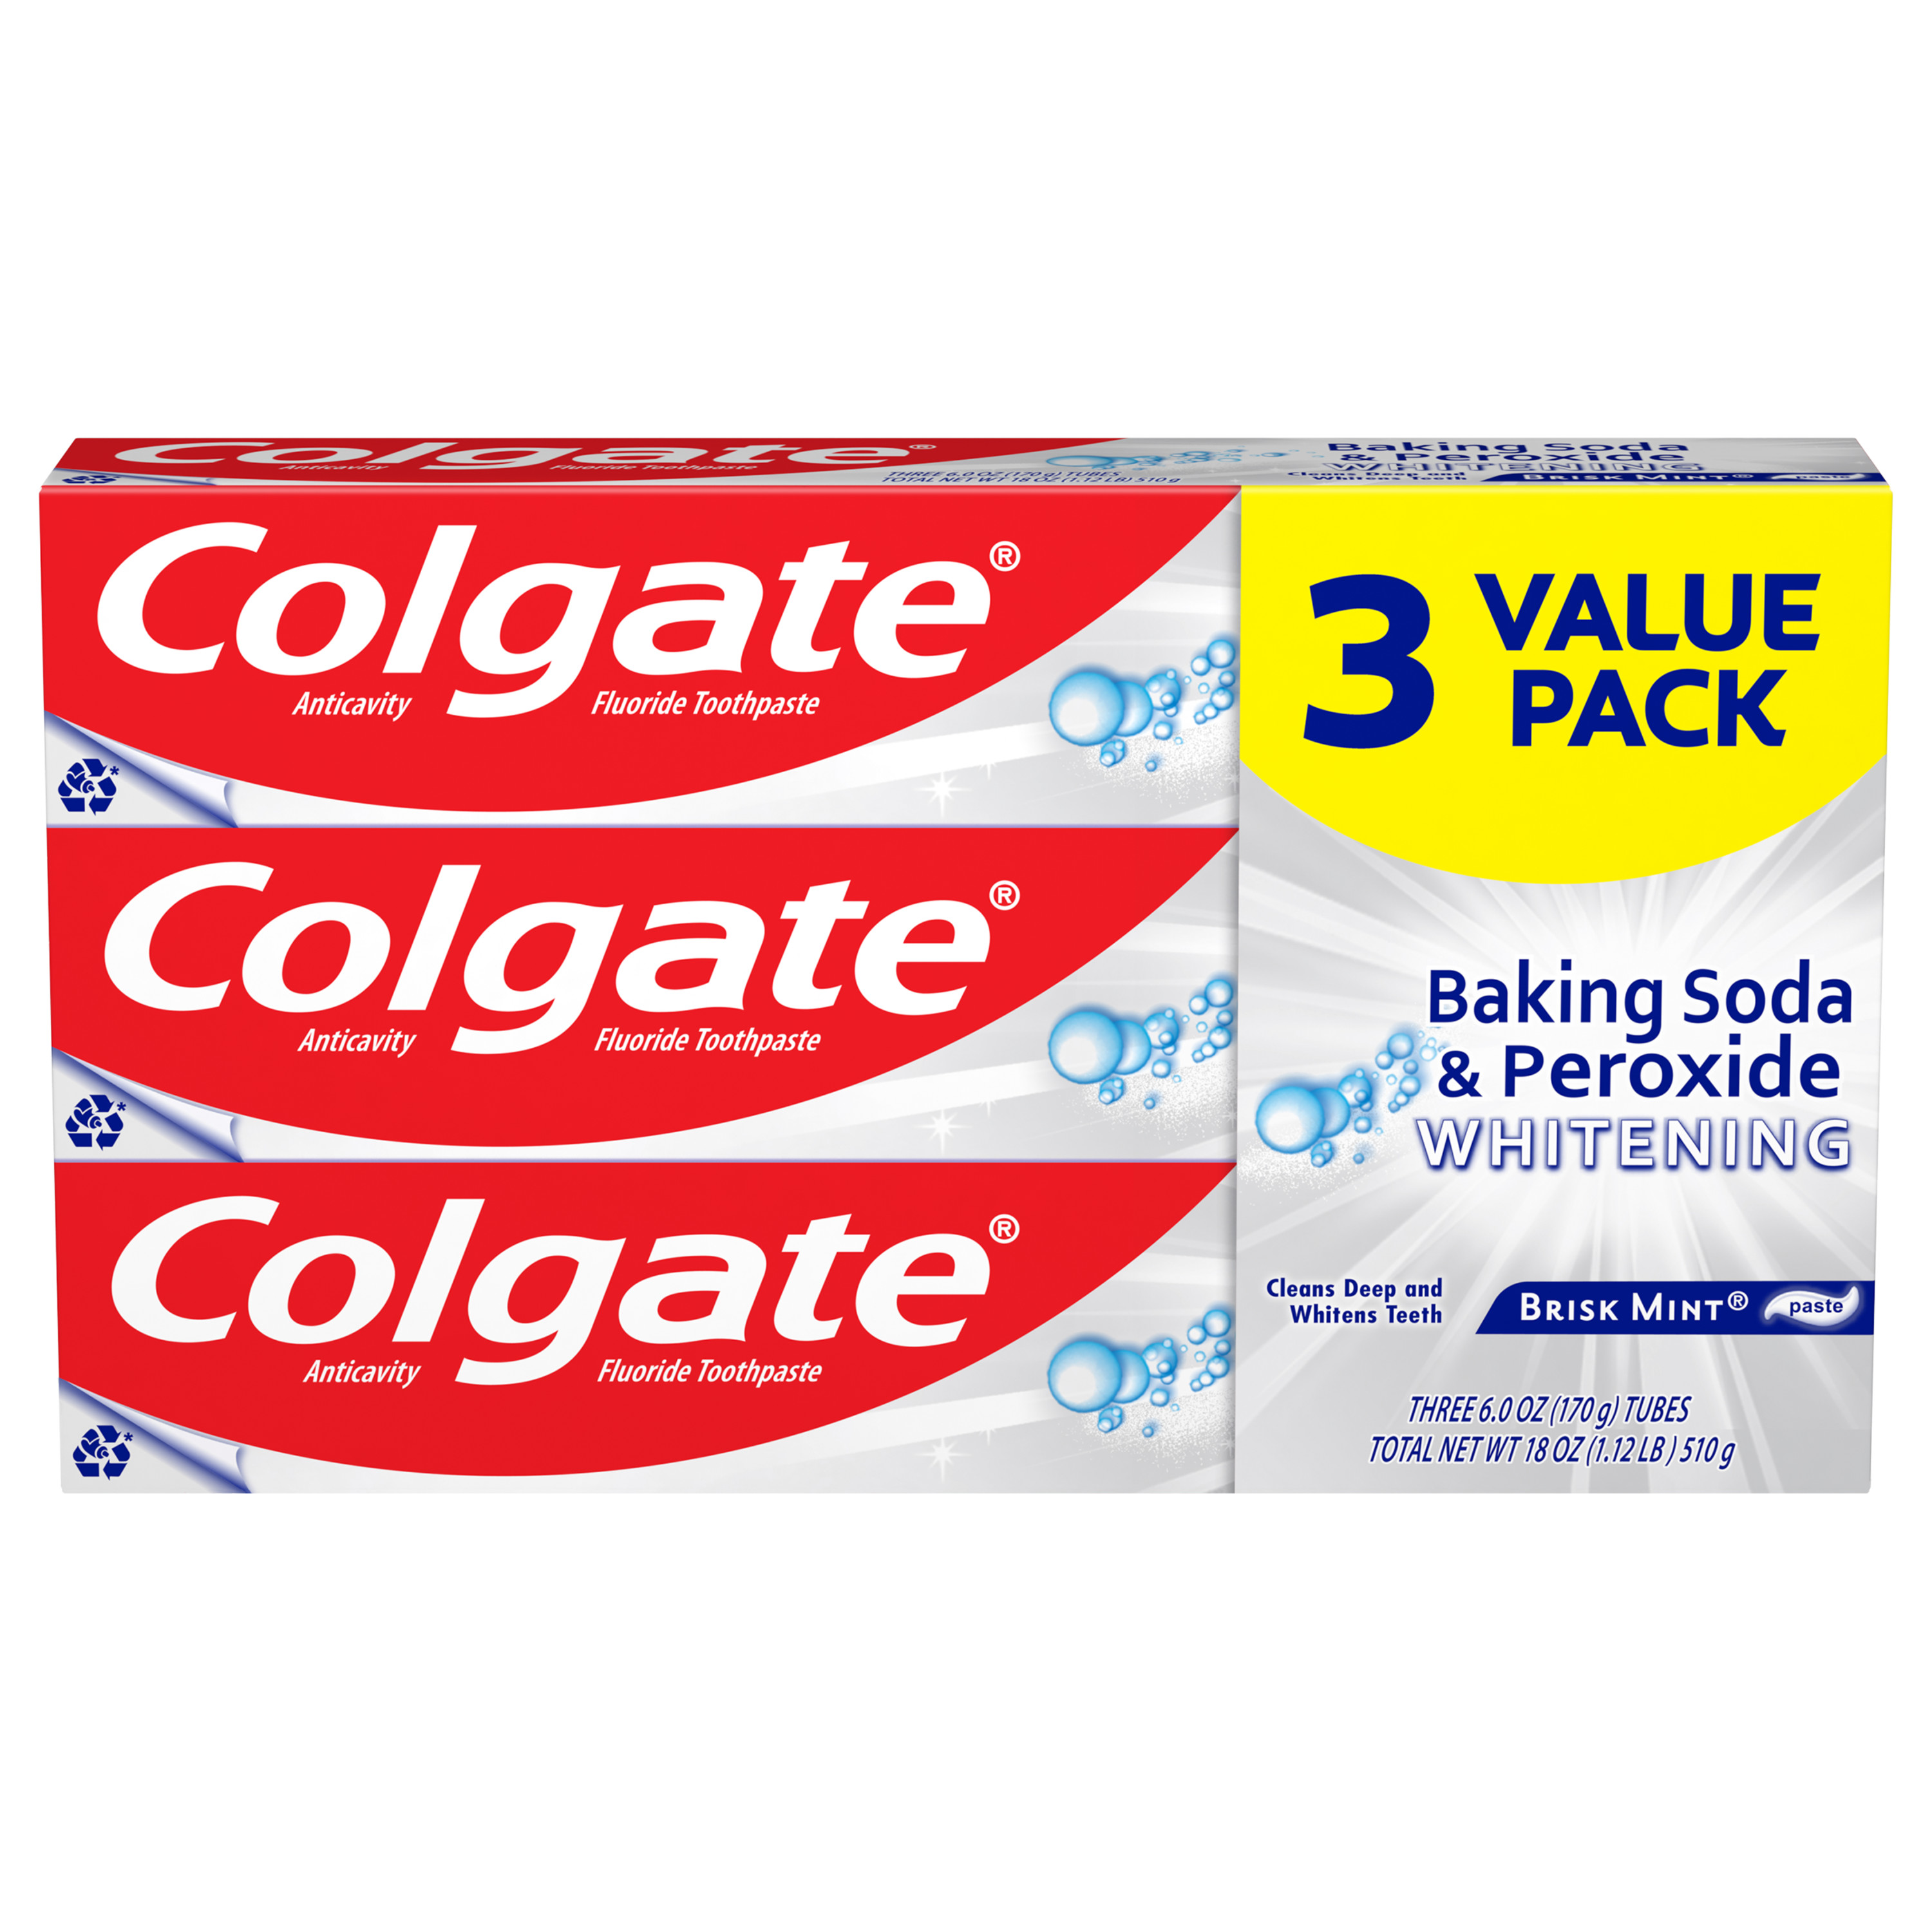 Colgate Baking Soda and Peroxide Whitening Toothpaste, Brisk Mint, 3 Pack - image 1 of 5